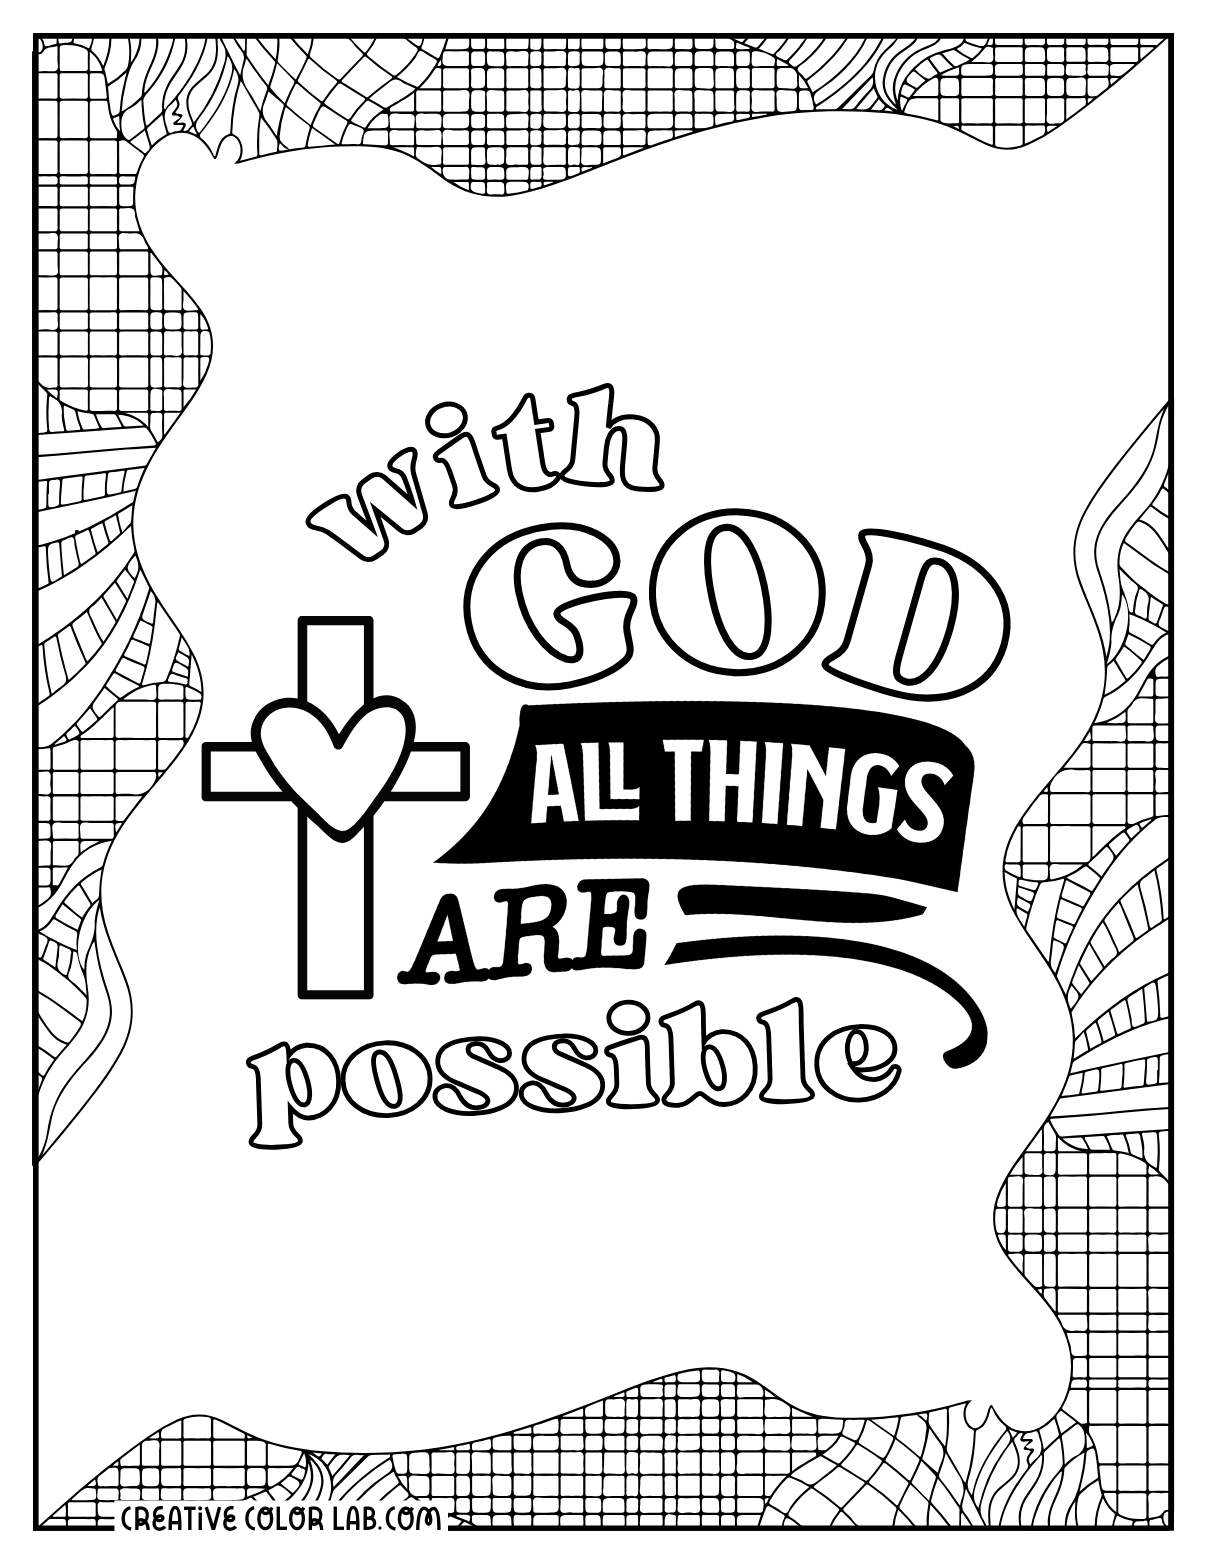 Sacred manual coloring page for adults.